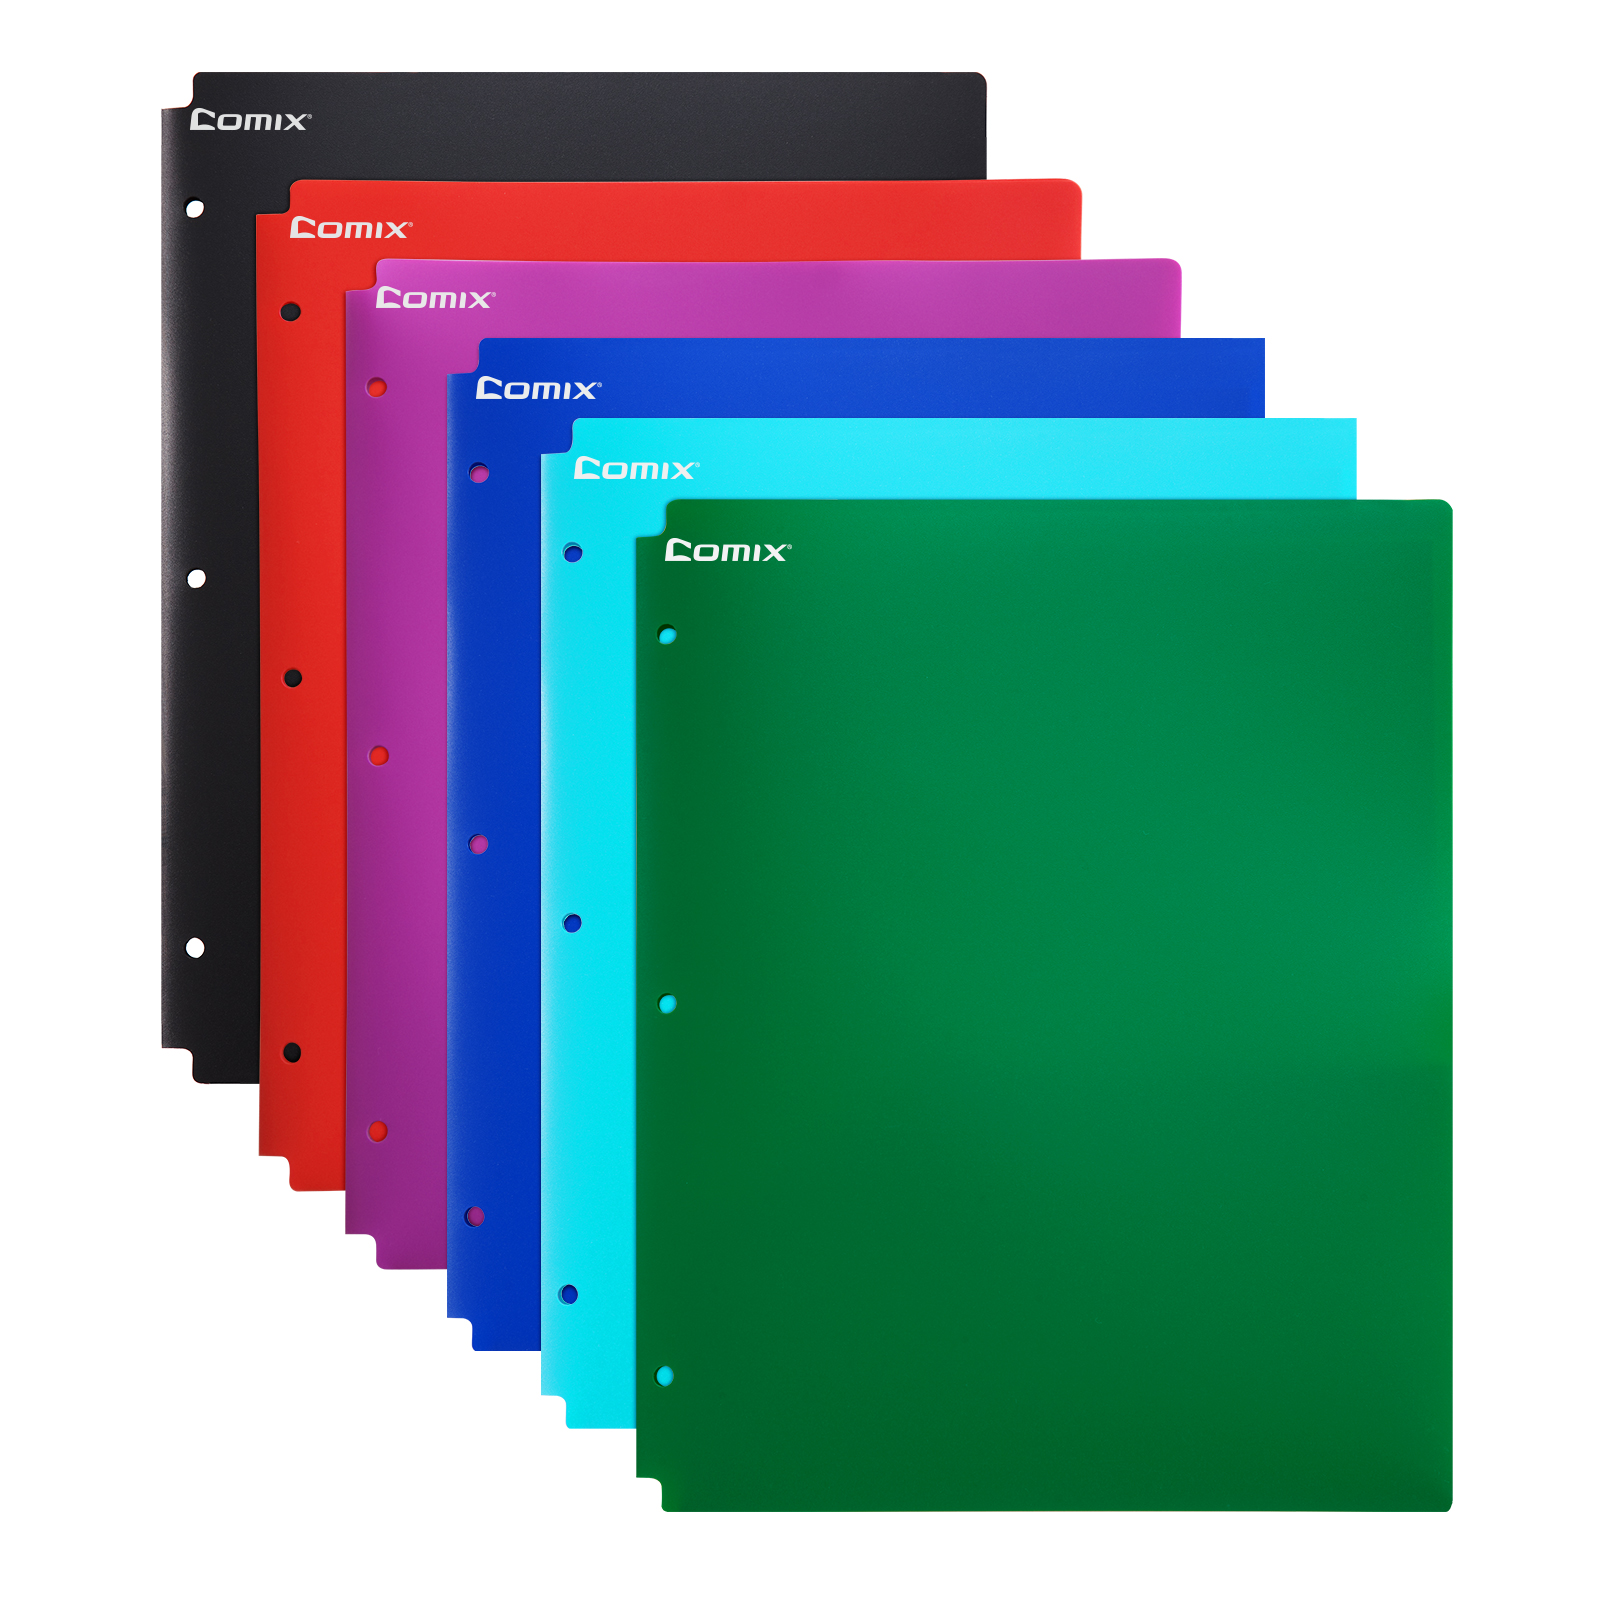 Comix Heavy Duty Plastic 2 Pocket Folders with 3 Hole, 6 Assorted Colors, Binder Folders with Pockets and Holes Letter Size for School and Office,12 Pack (Assorted Fashion Colors)